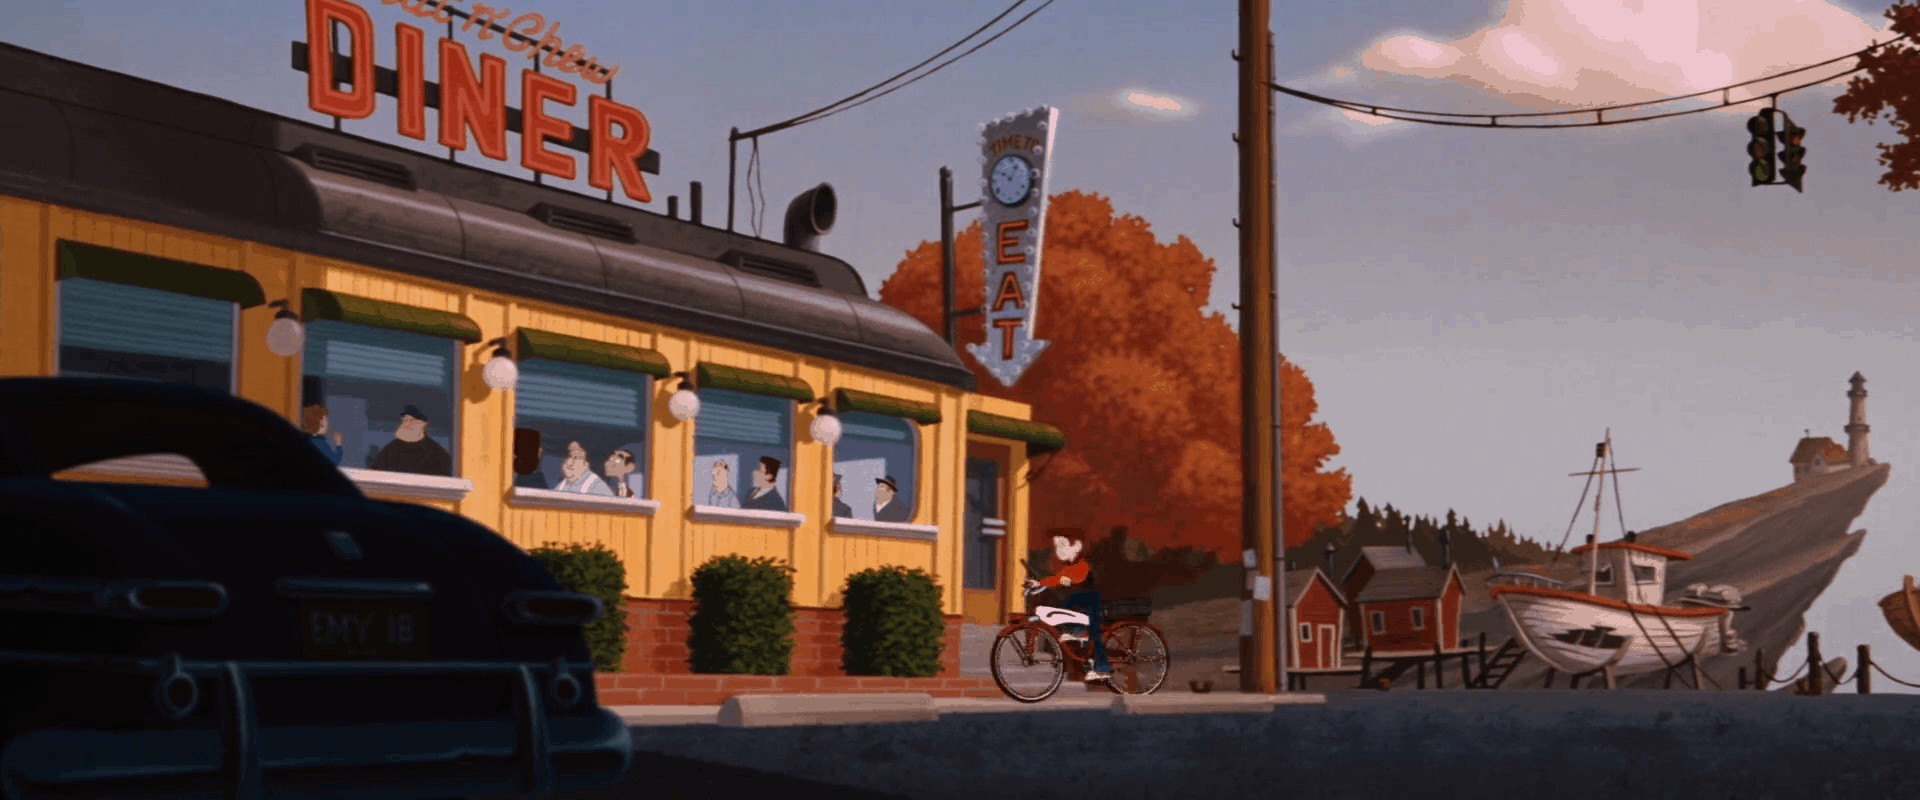 The Iron Giant diner